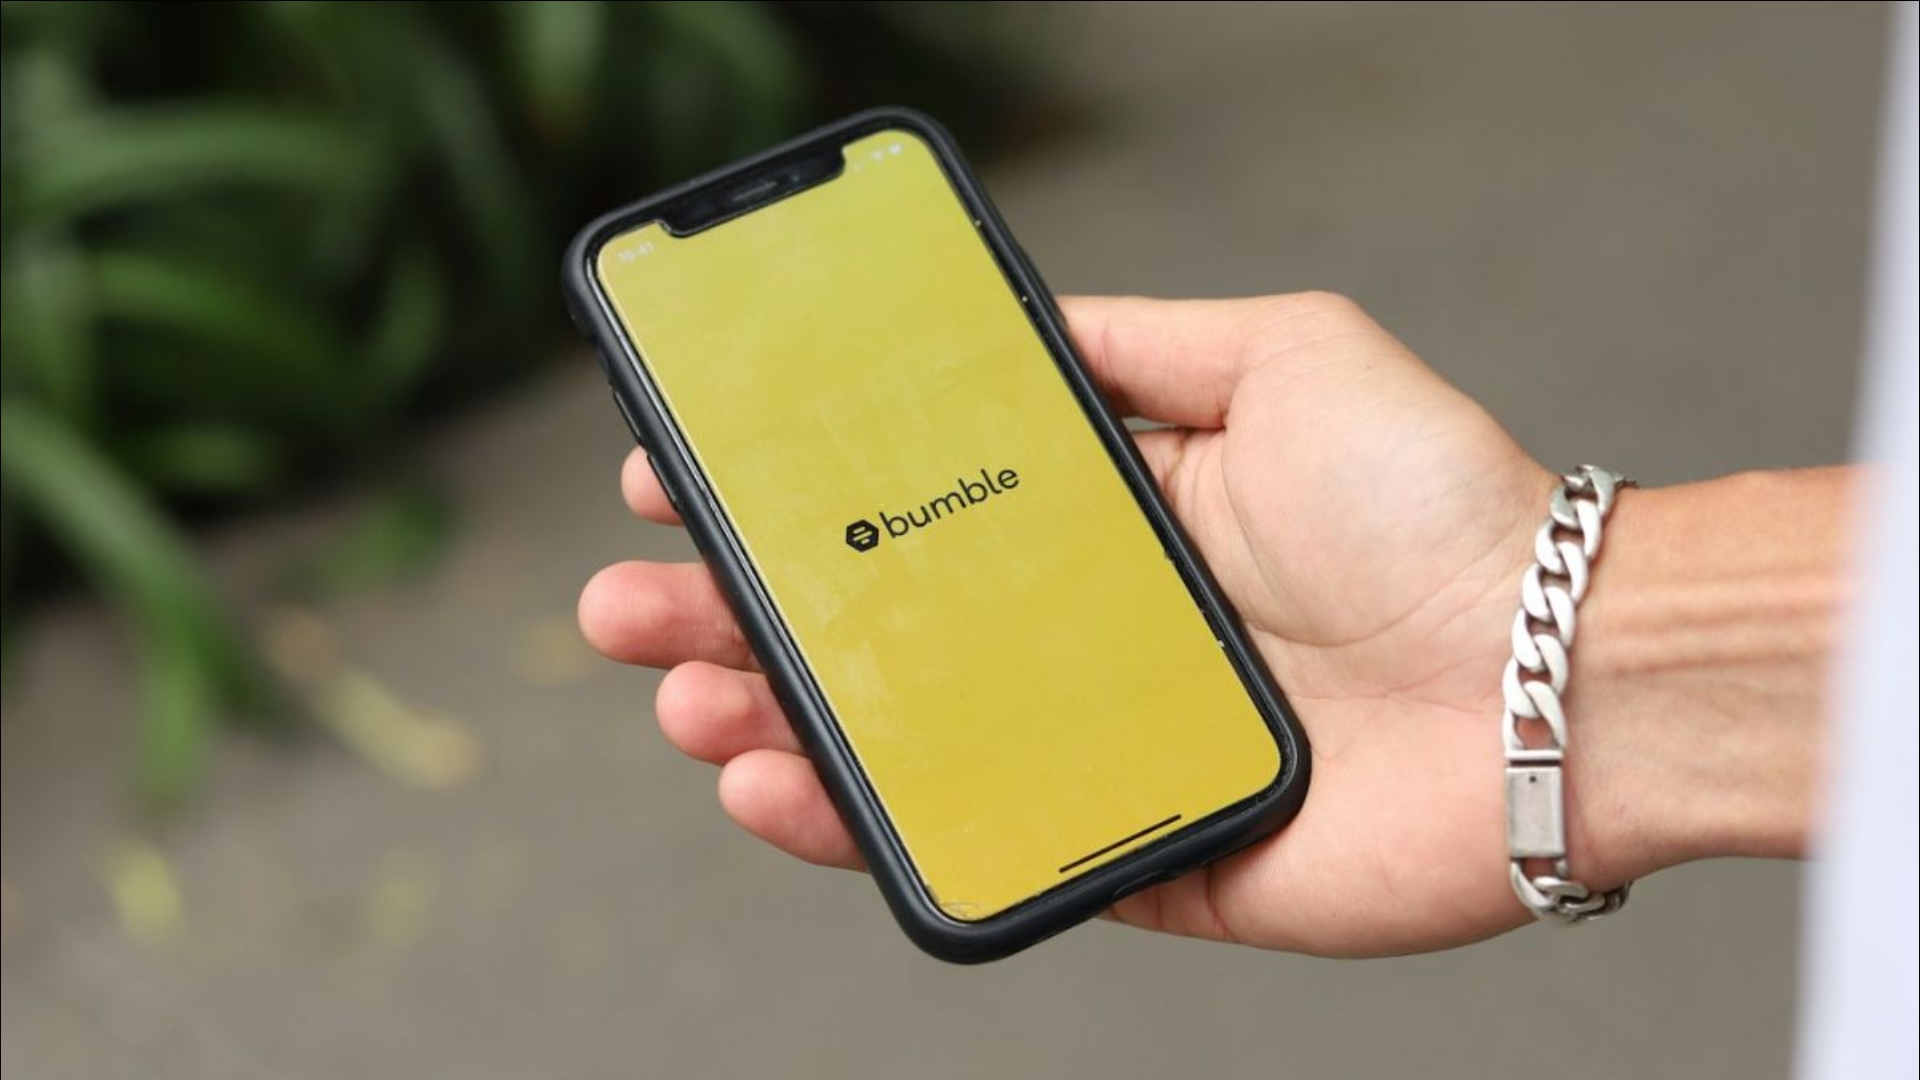 Bumble introduces a "Deception Detector" with AI to combat scams.